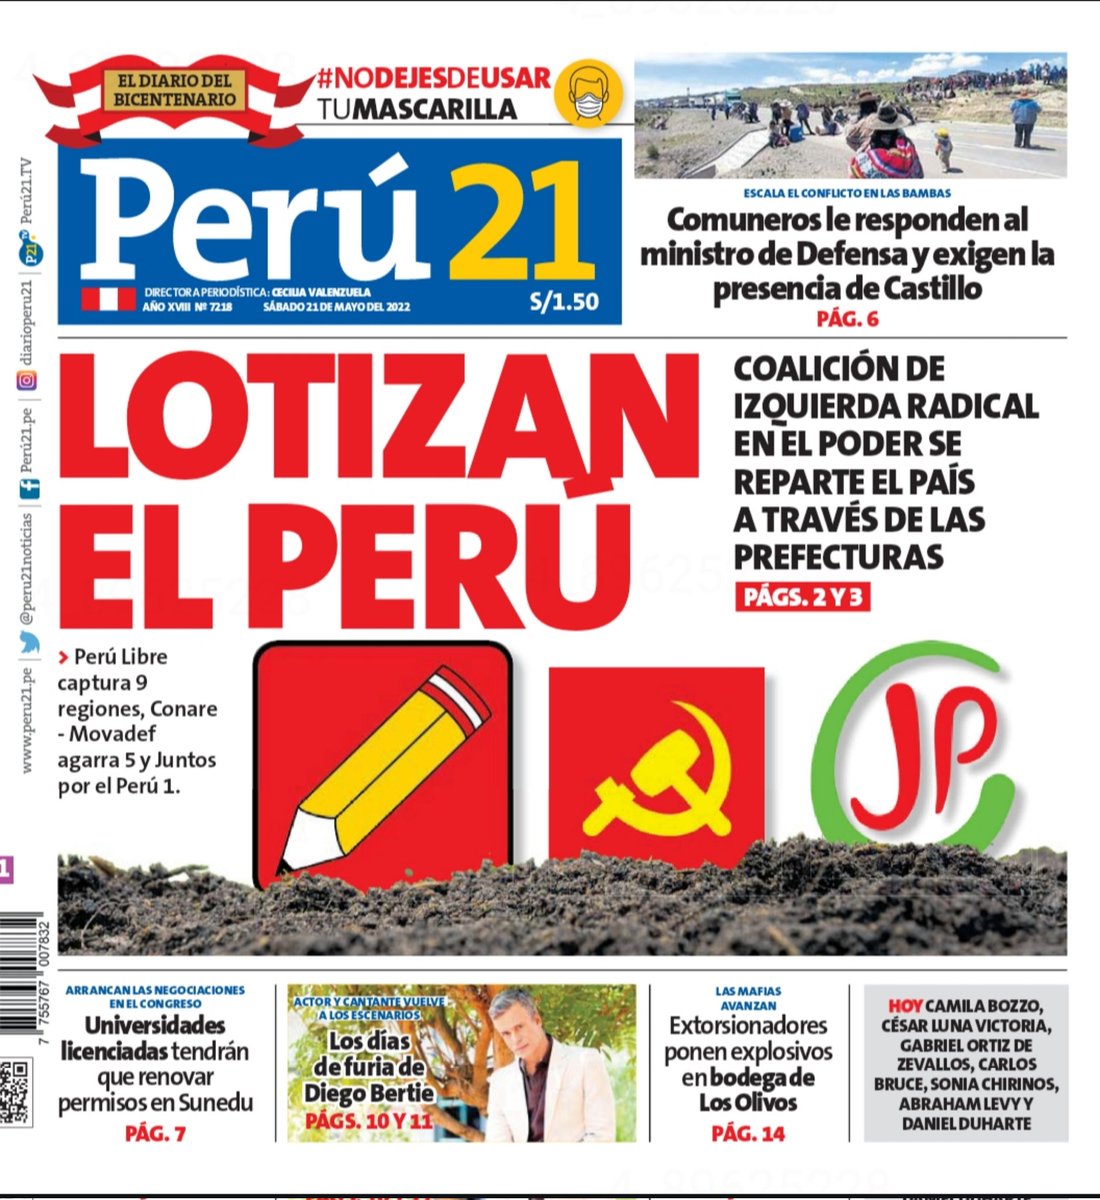 Peru newspapers report corruption, coming to compare with the country being divided into lots.  I don't think President Pedro Castillo will finish his mandate. There is no economic management or ensuring food for the future, which will be serious. https://t.co/u2CrjCMtJU